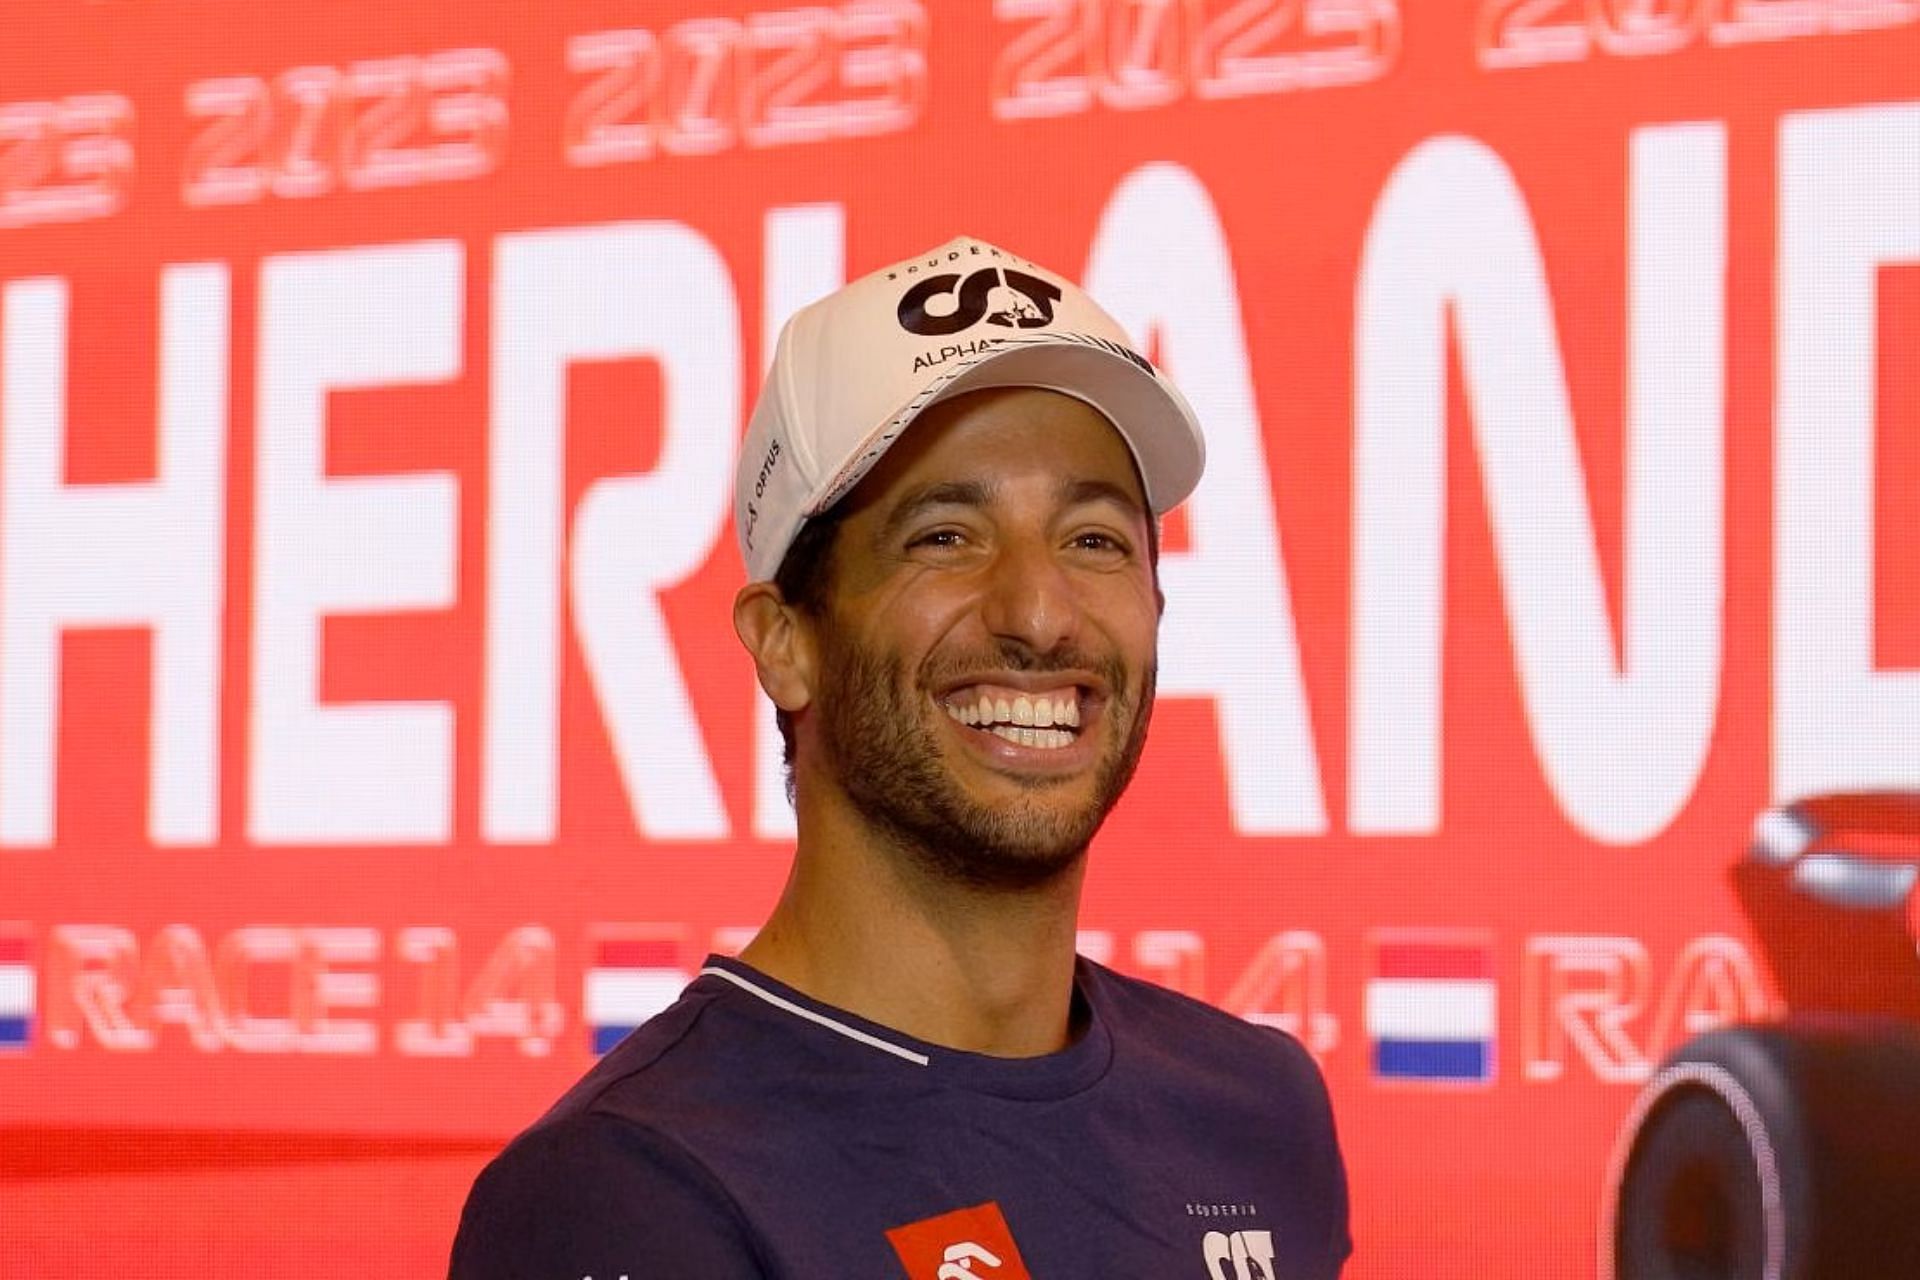 Daniel Ricciardo attends the Drivers Press Conference during previews ahead of the 2023 F1 Dutch Grand Prix. (Photo by Dean Mouhtaropoulos/Getty Images)